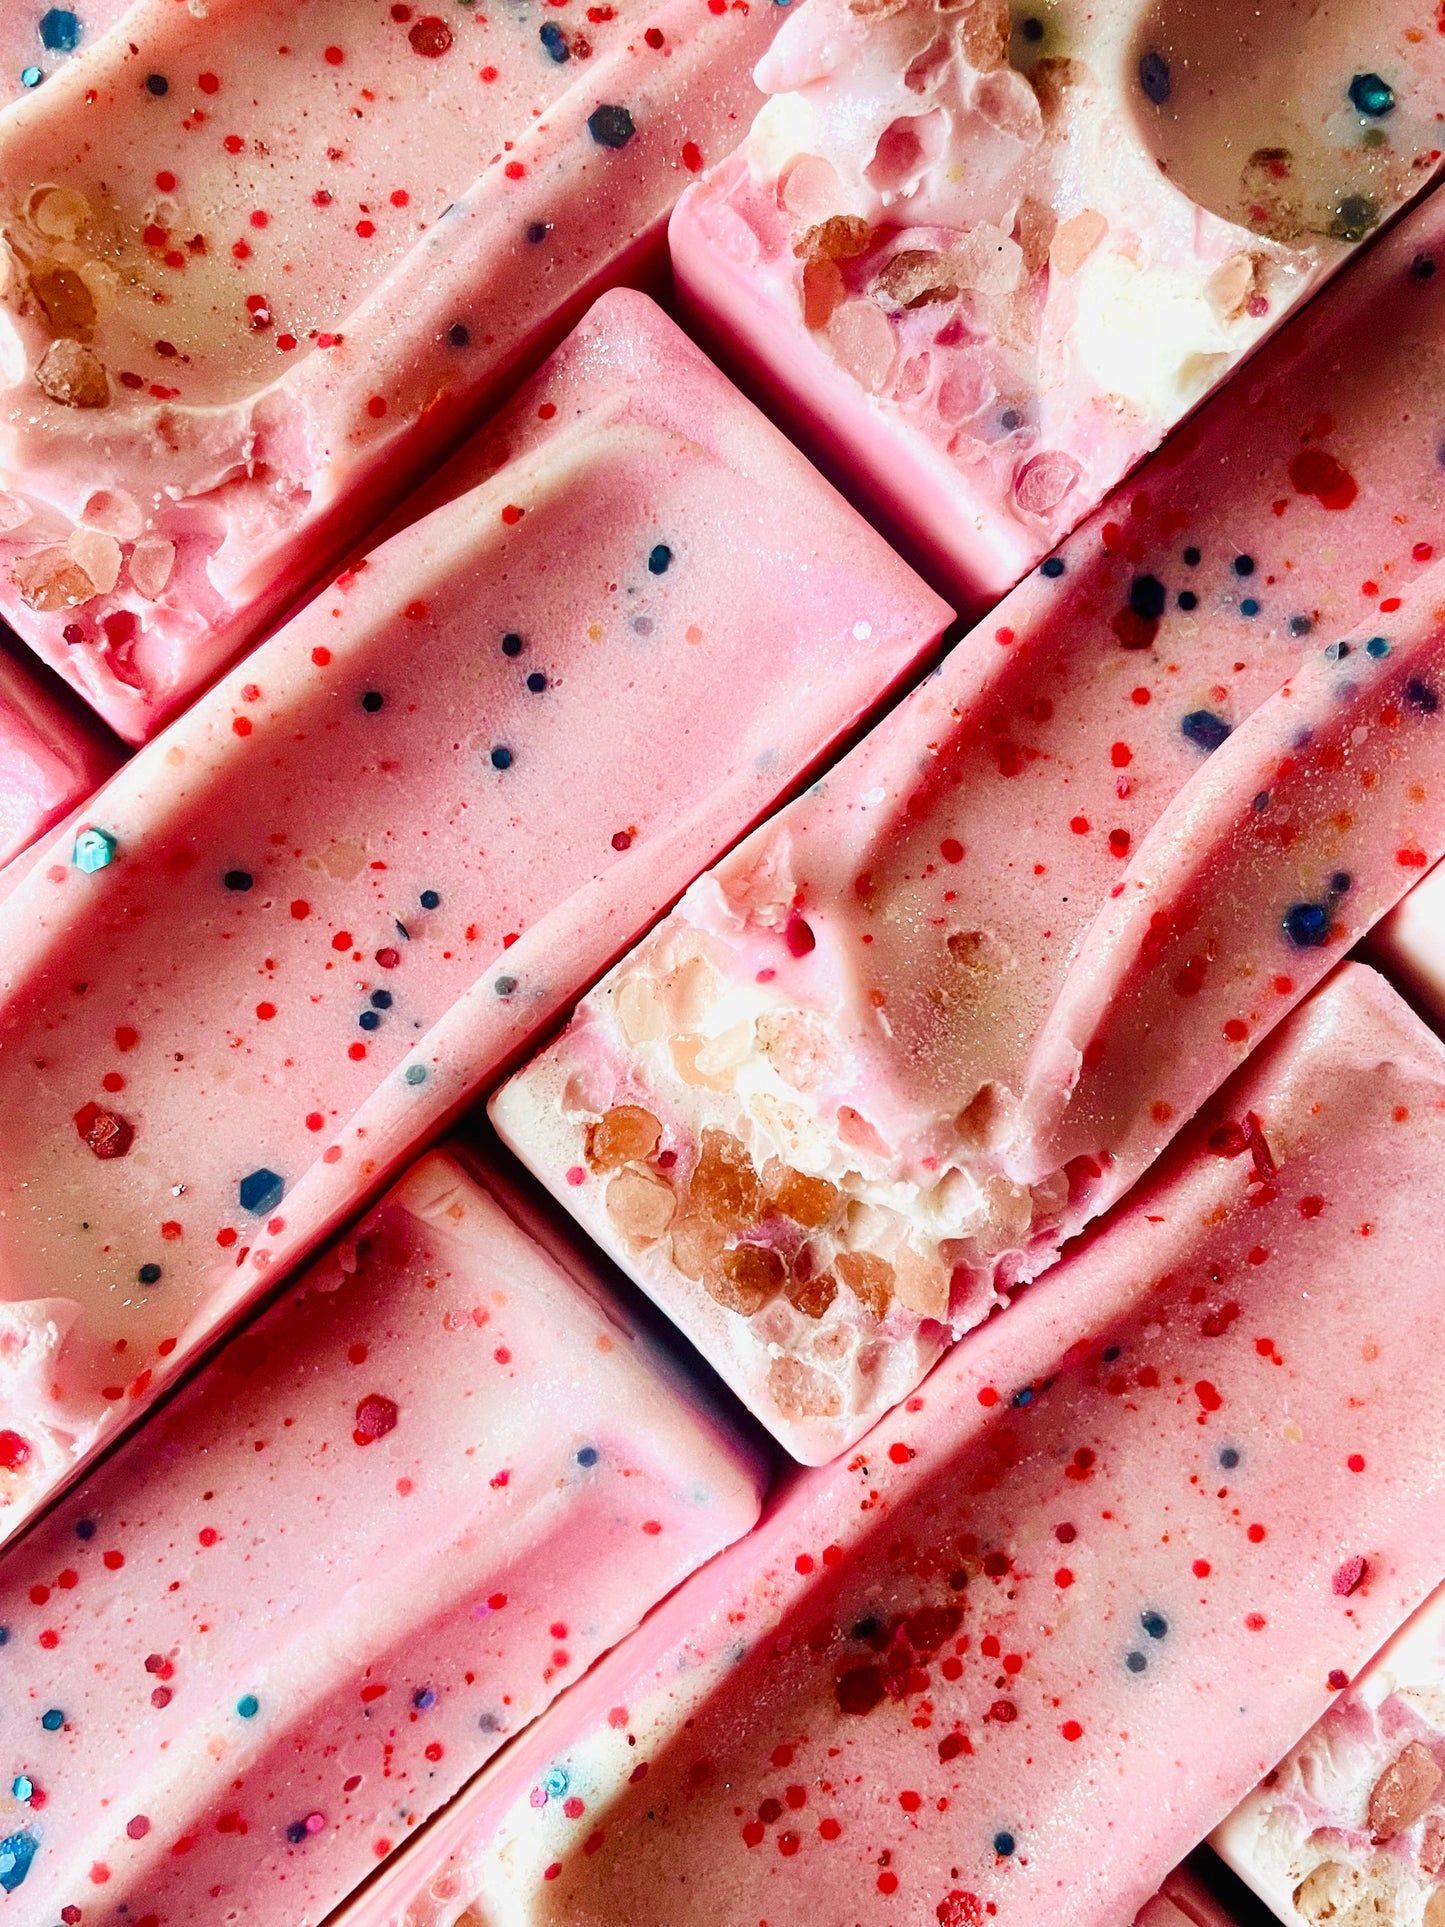 A closeup of the tops of Forever Young bar soaps. Each bar has pink Himalayan sea salt and glitter on top.